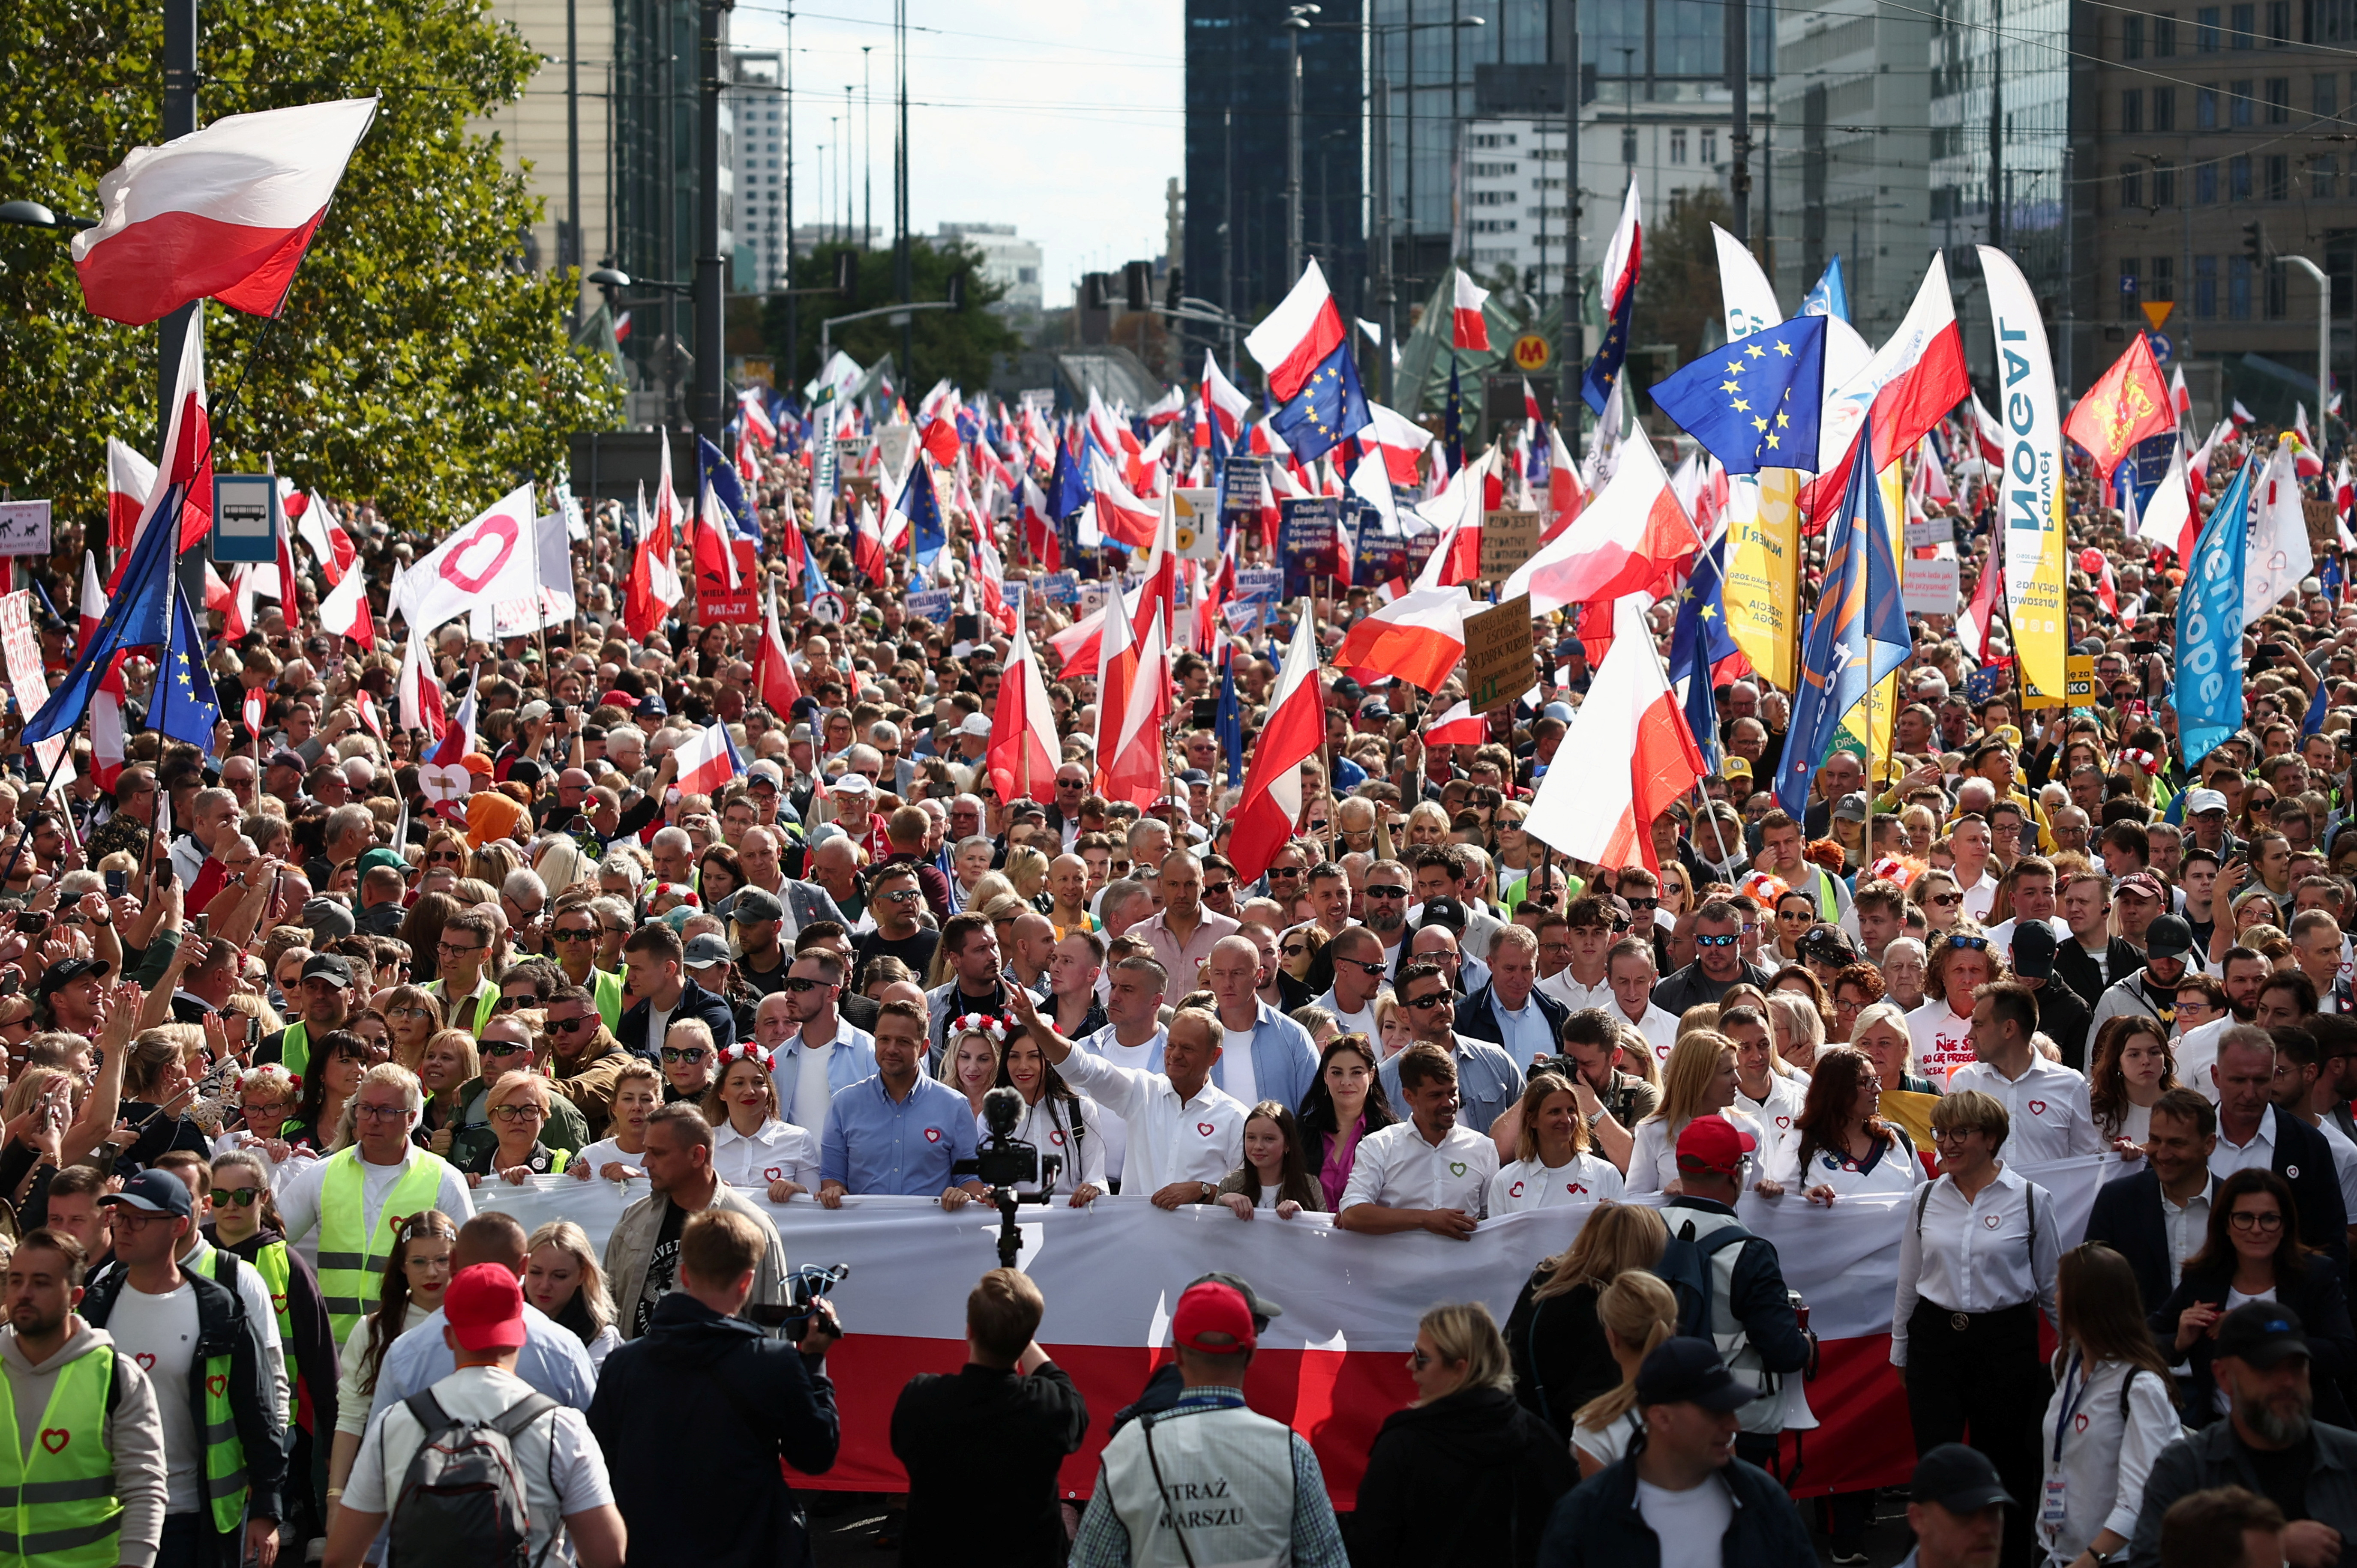 Liberal opposition holds "Marsz Miliona Serc" march in Warsaw